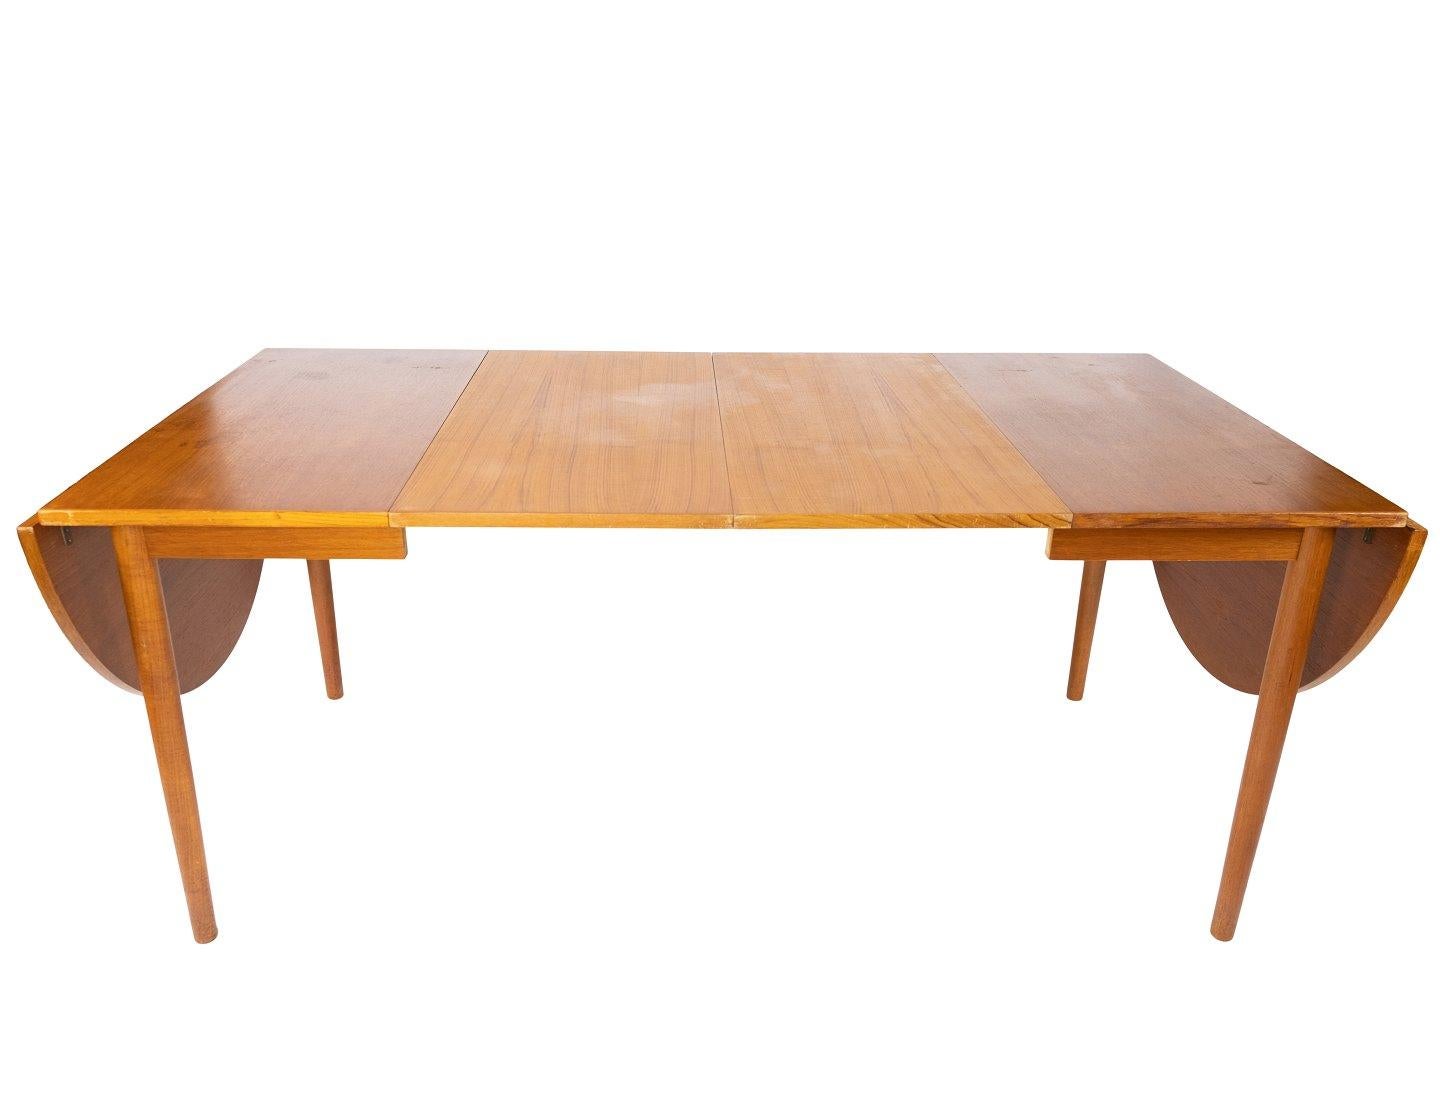 Danish Dining Table in Teak Designed by Arne Vodder from the 1960s For Sale